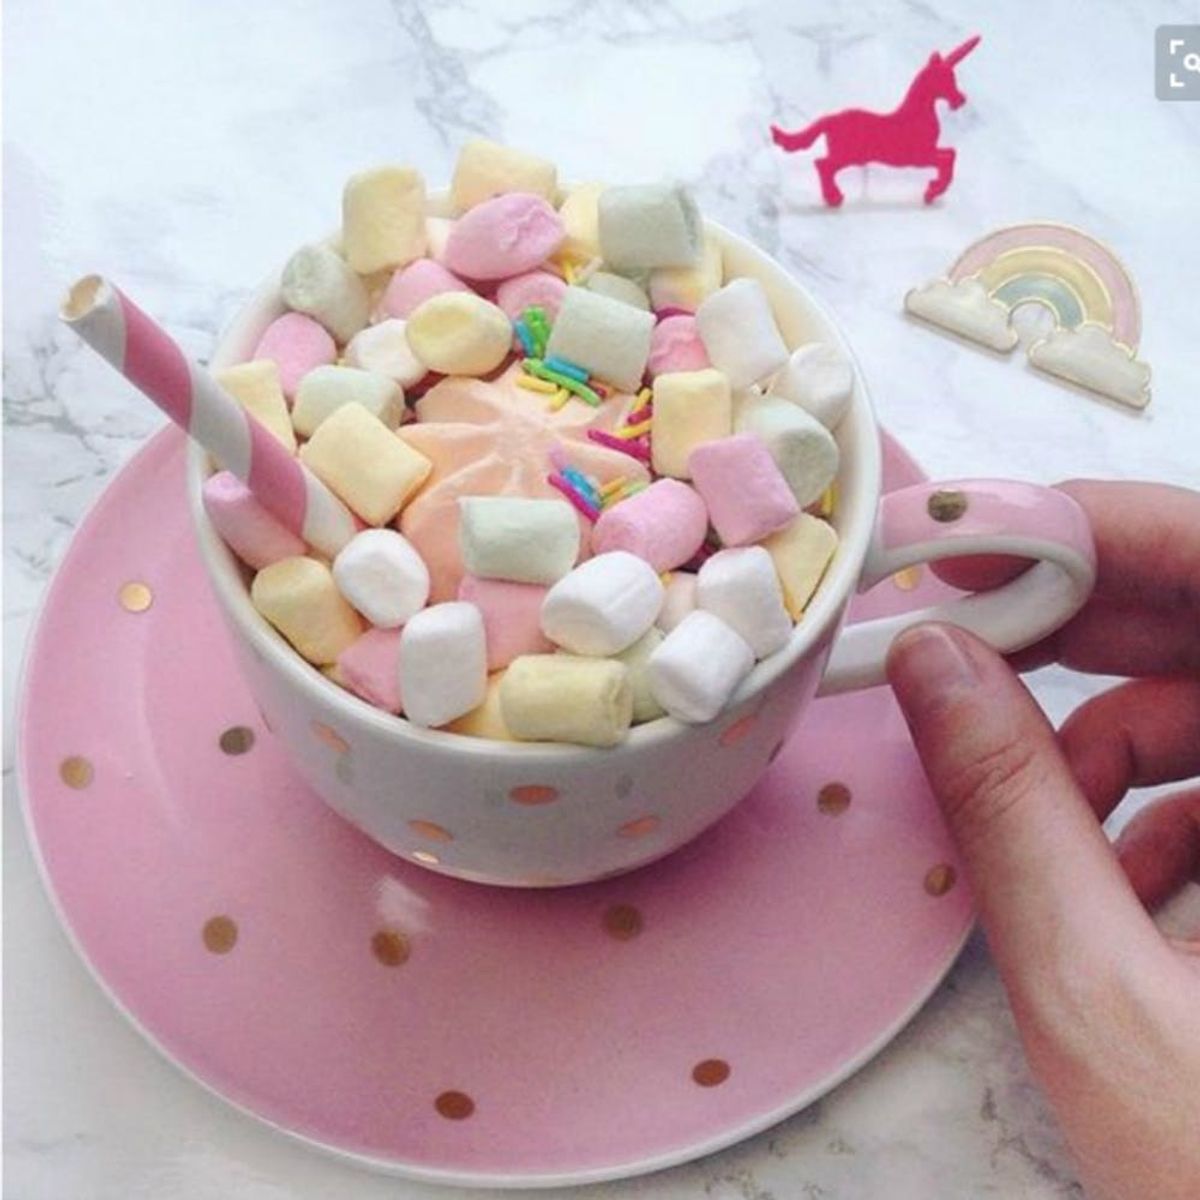 15 Instagrammers Bringing the Magic With Unicorn Hot Chocolate